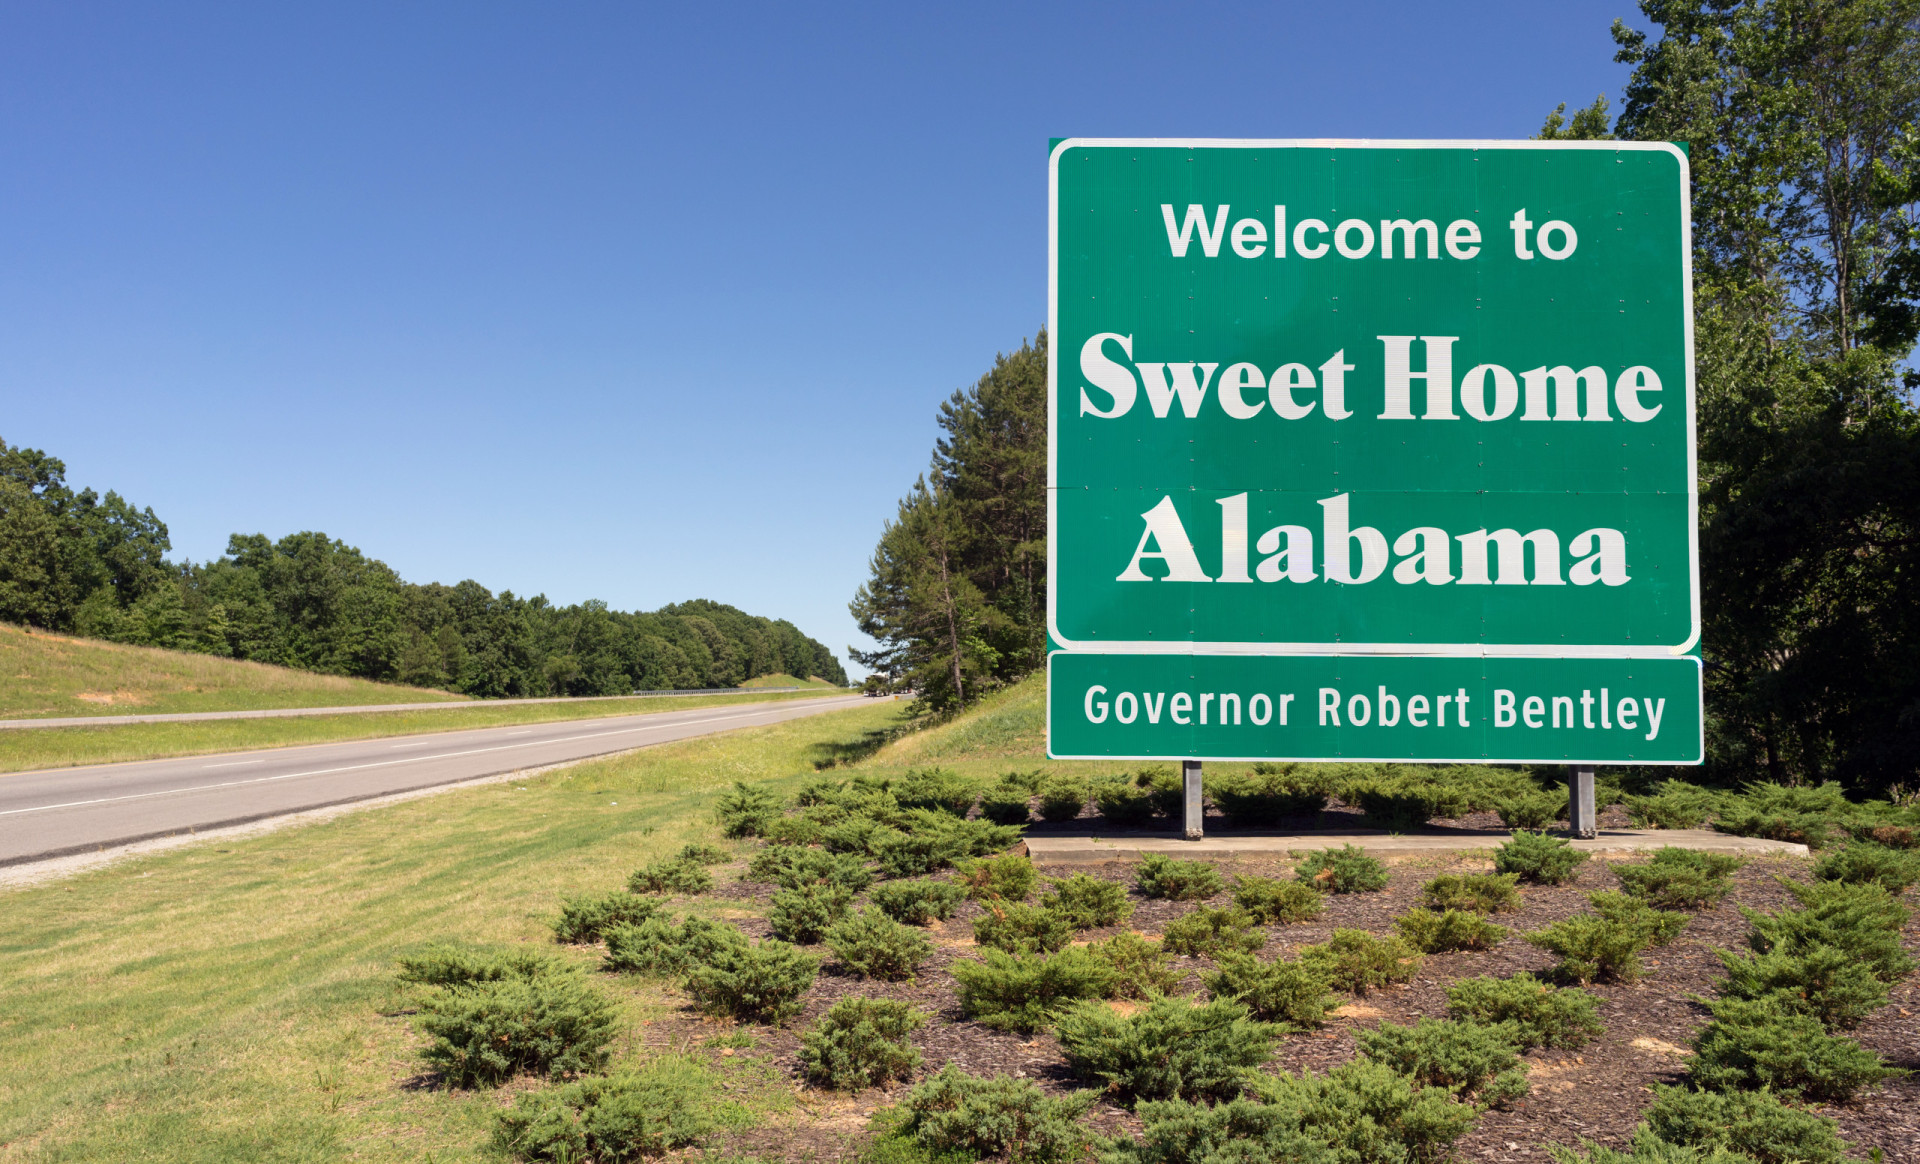 <p>Alabama state's welcome sign makes reference to the 1974 song 'Sweet Home Alabama' by southern rock band Lynyrd Skynyrd.</p><p><a href="https://www.msn.com/en-us/community/channel/vid-7xx8mnucu55yw63we9va2gwr7uihbxwc68fxqp25x6tg4ftibpra?cvid=94631541bc0f4f89bfd59158d696ad7e">Follow us and access great exclusive content every day</a></p>